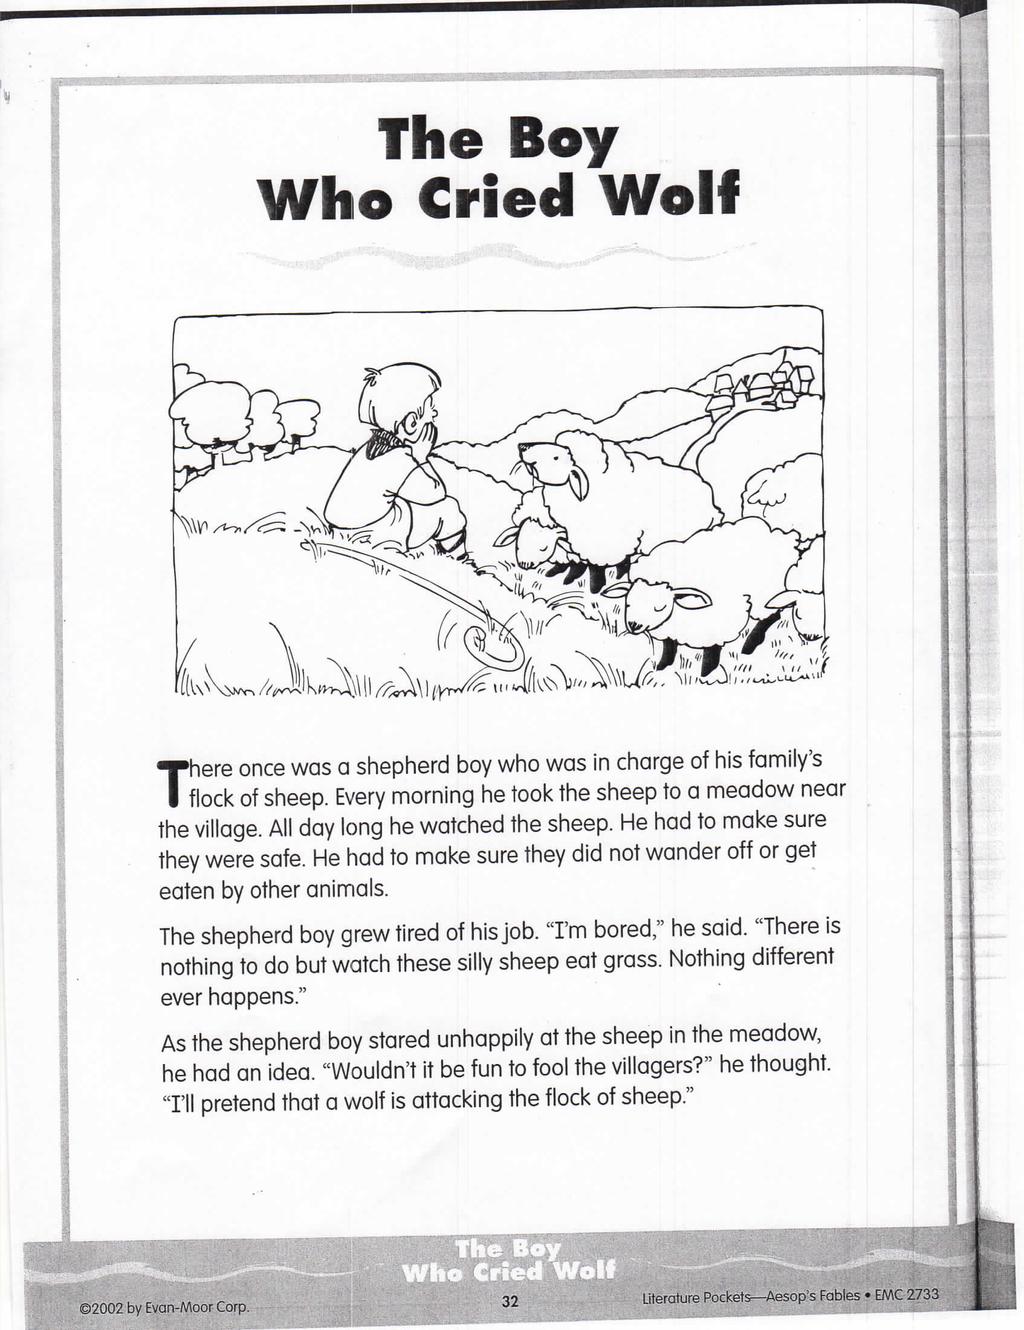 The Boy Who Cried Wolf 'here once was a shepherd boy who was in charge of his family's I flock of sheep. Every morning he took the sheep to a meadow near the village.